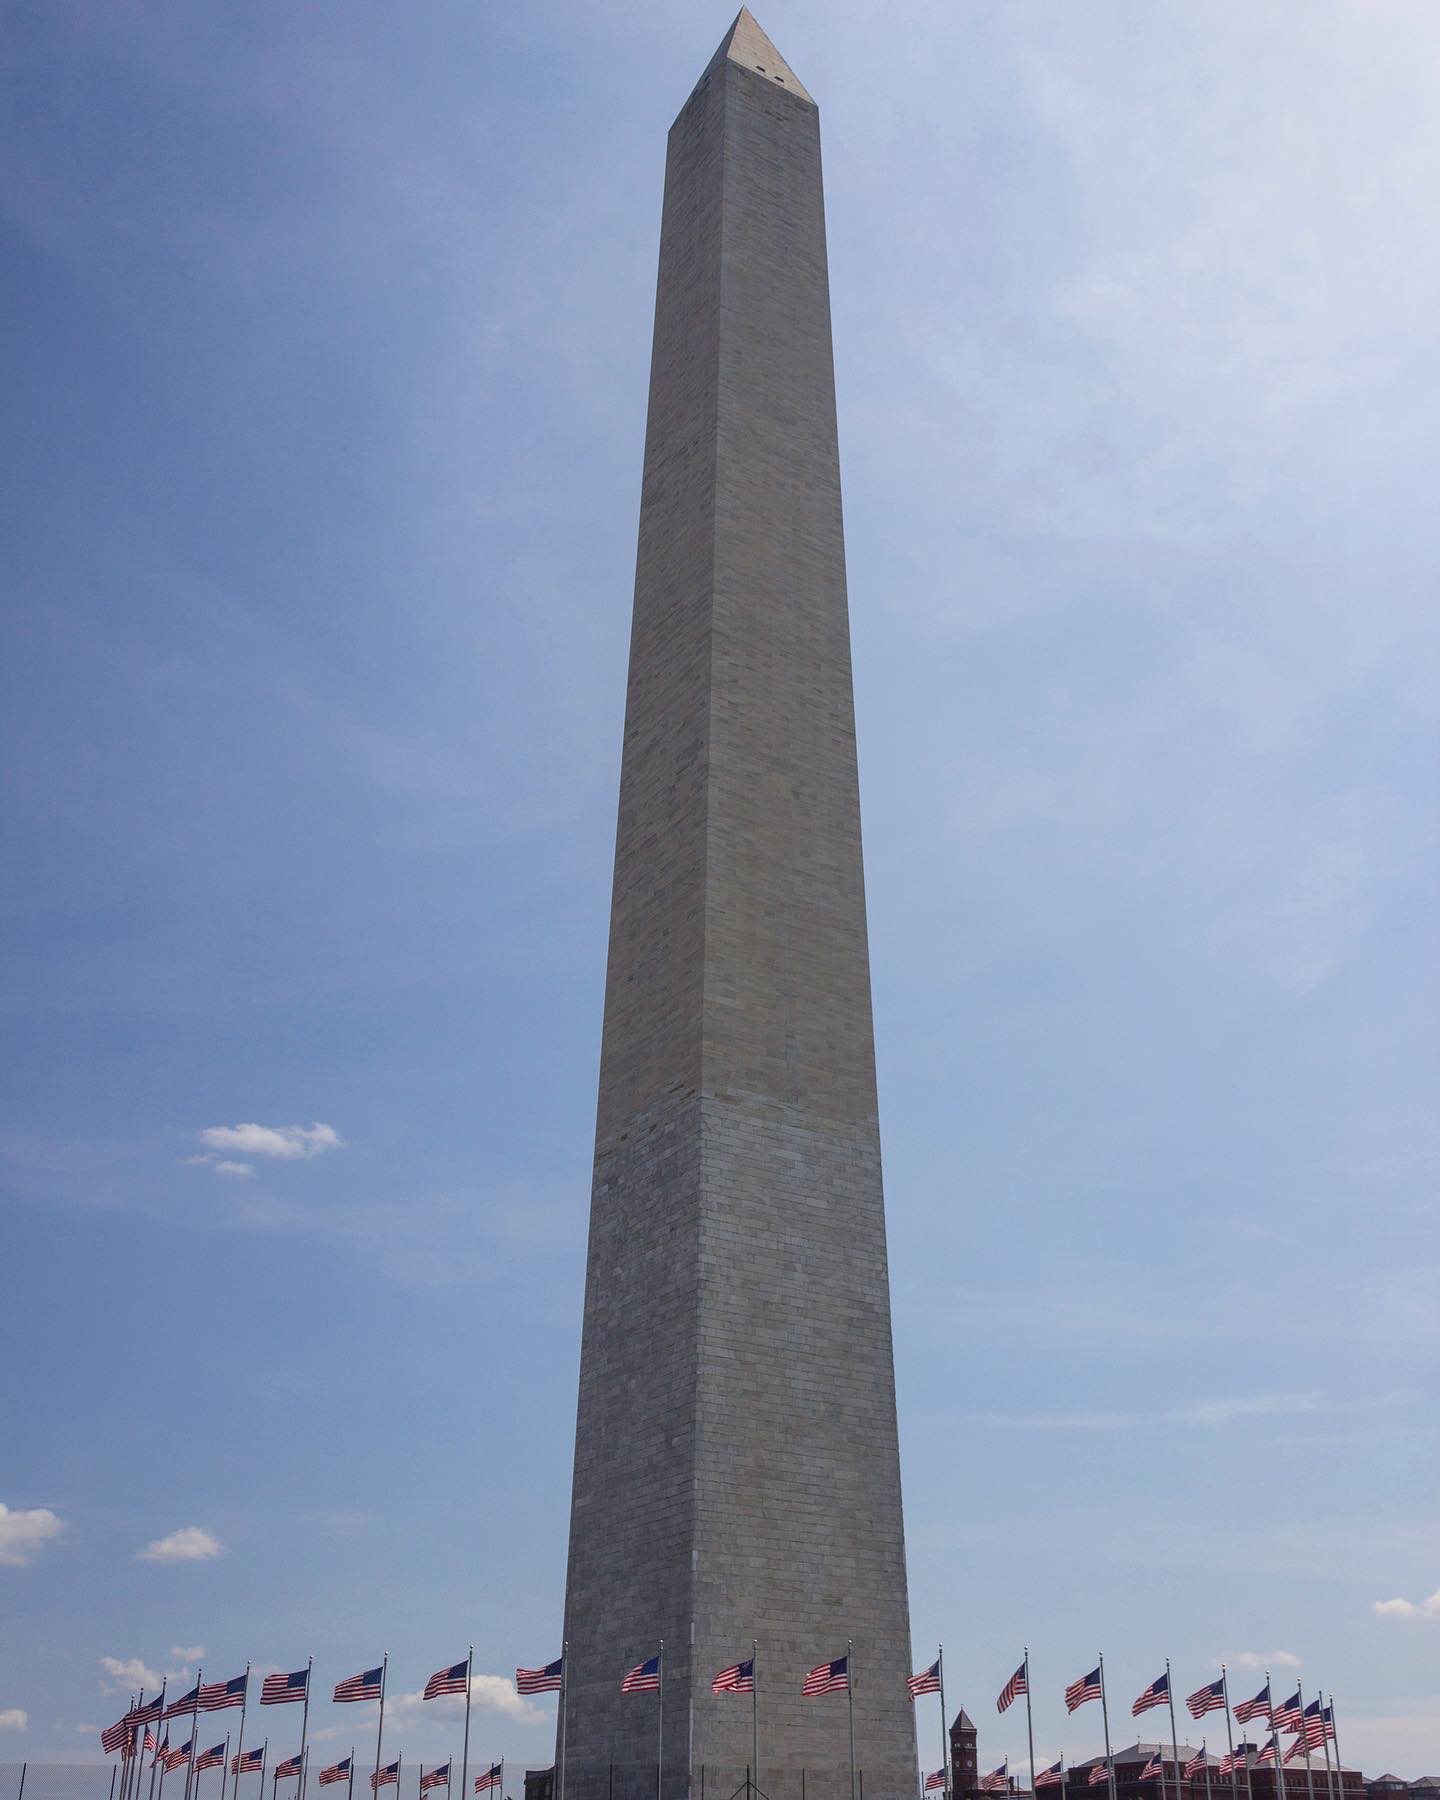 The Washington Monument is an obelisk on the National Mall in Washington, D.C., built to commemorate George Washington, once commander-in-chief of the Continental Army and the first President of the United States. Located almost due east of the Reflecting Pool and the Lincoln Memorial, the monument, made of marble, granite, and bluestone gneiss, is both the world's tallest predominantly stone structure and the world's tallest obelisk. It is the tallest monumental column in the world if all are measured above their pedestrian entrances. It was the tallest structure in the world from 1884 to 1889, when it was overtaken by the Eiffel Tower in Paris.
.
.
#washington #washingtondc #george #georgewashington #obelisk #usa #us #unitedstates #firstpresident #districtofcolumbia #starsandstripes #flag #travel #capital #lincoln #mall #themall #capitol #travelling #bluesky #nationalmall #thenationalmall